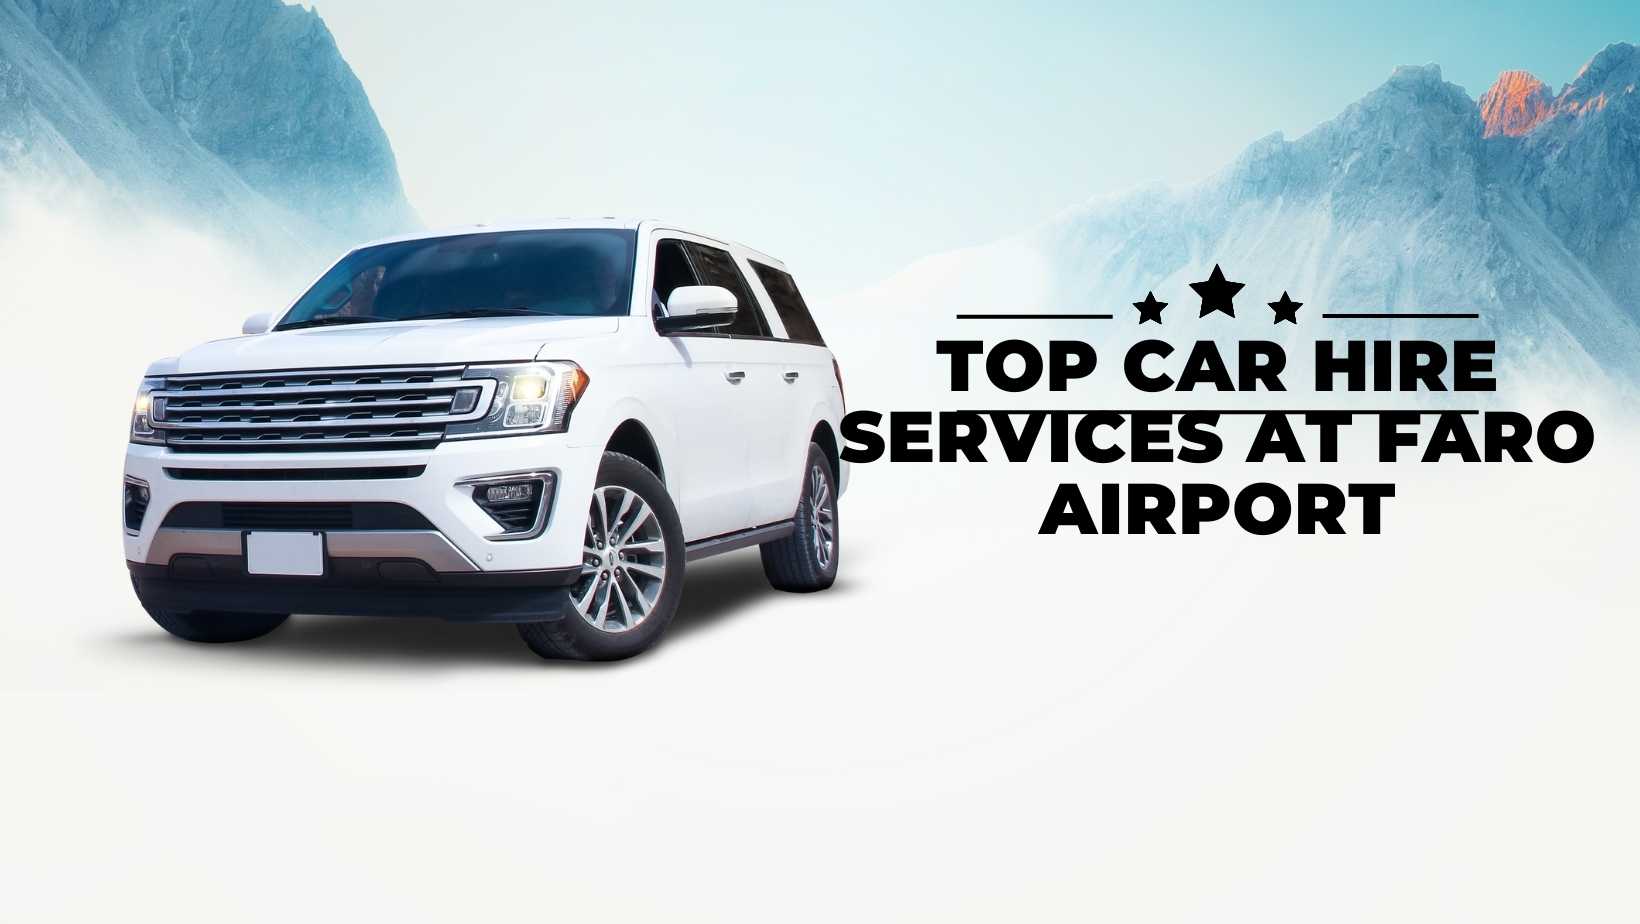 Top Car Hire Services at Faro Airport